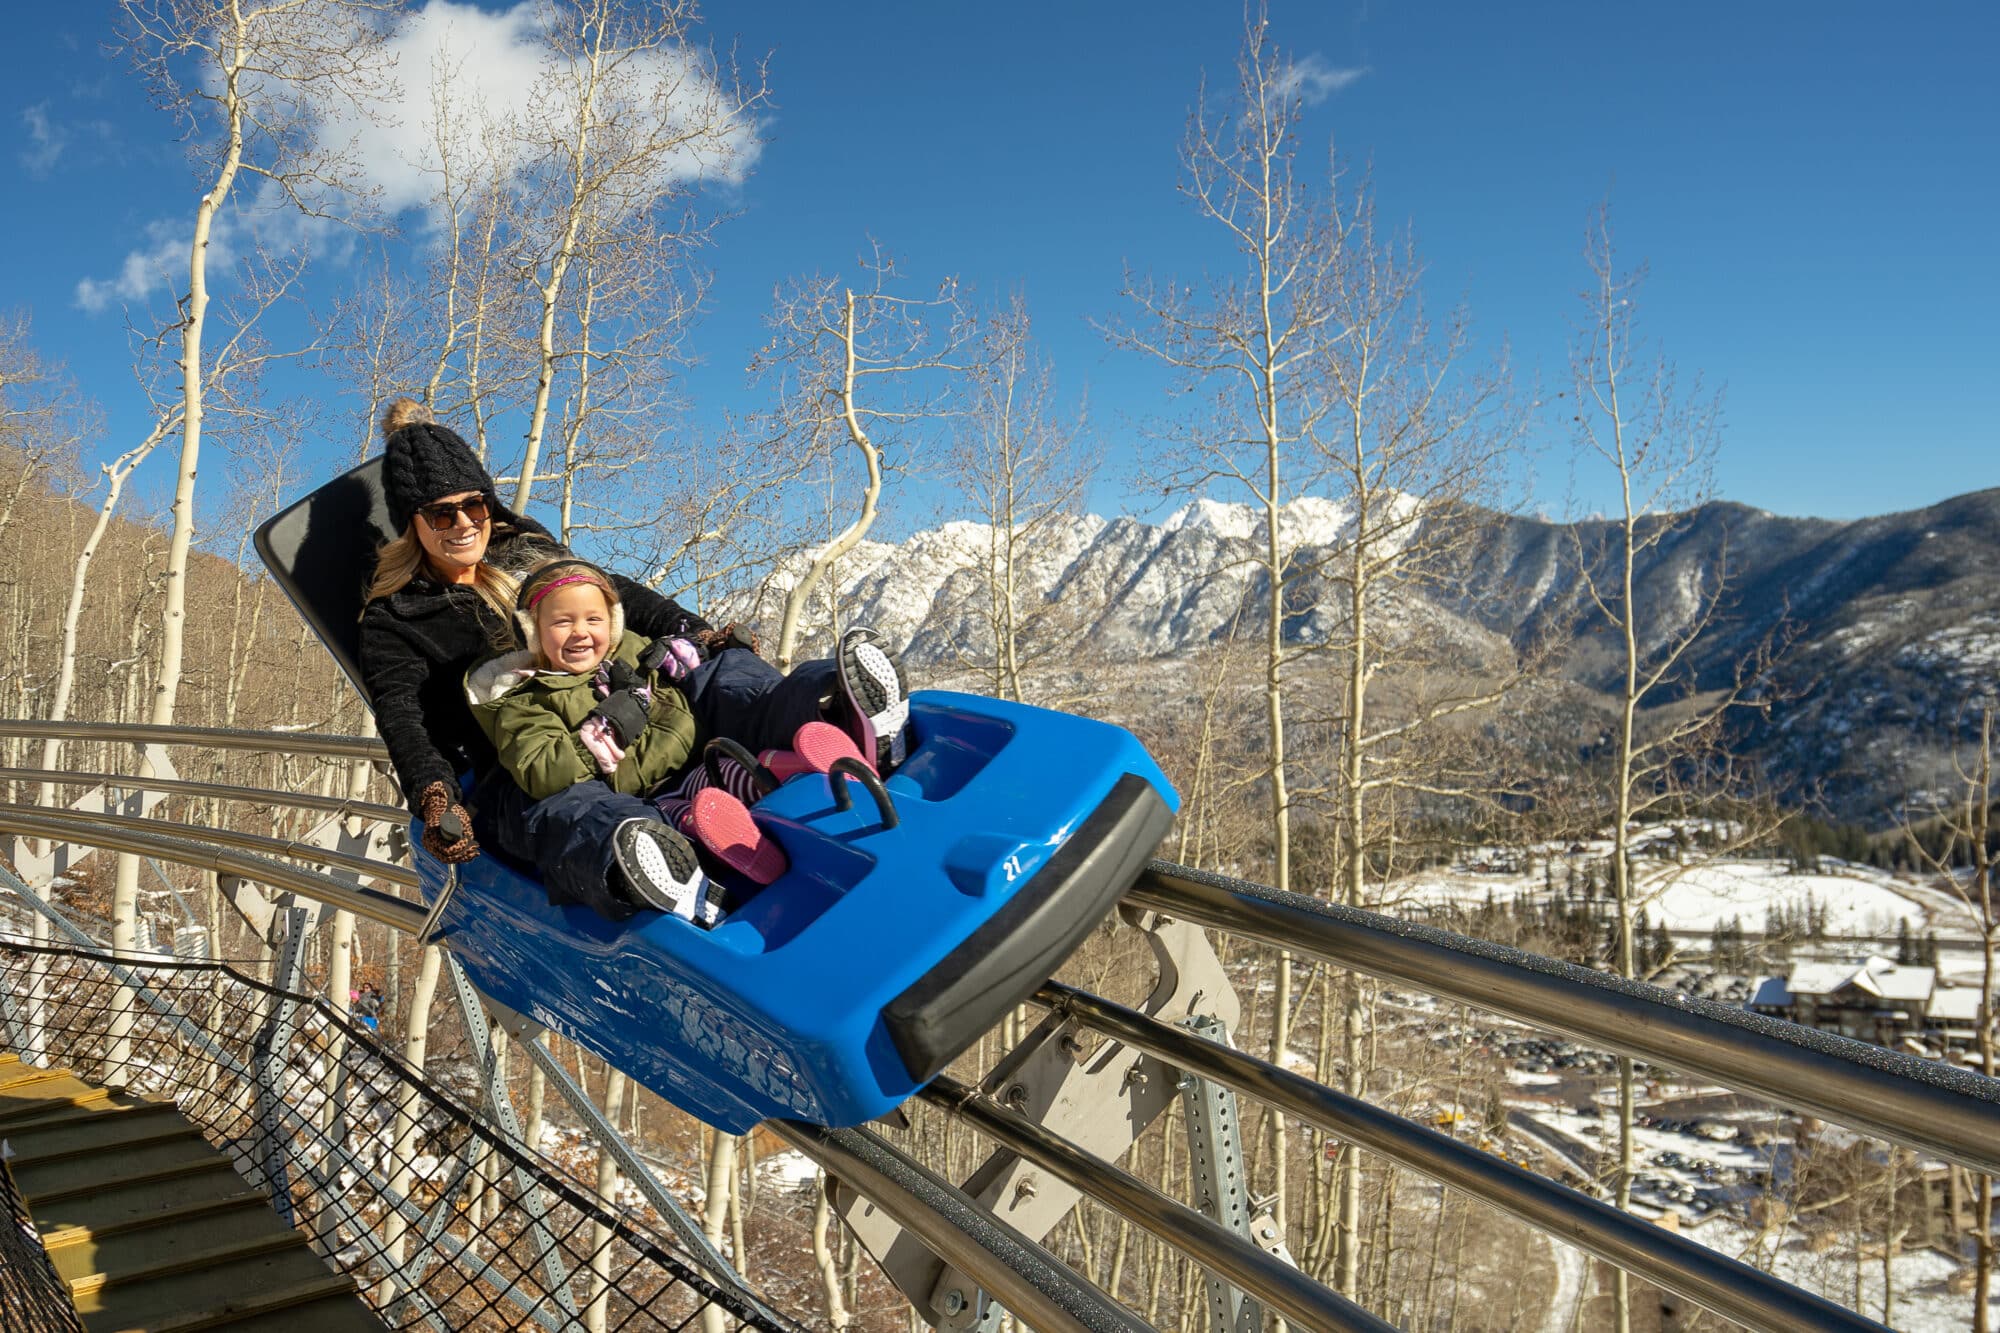 Women and her kid on mountain coaster